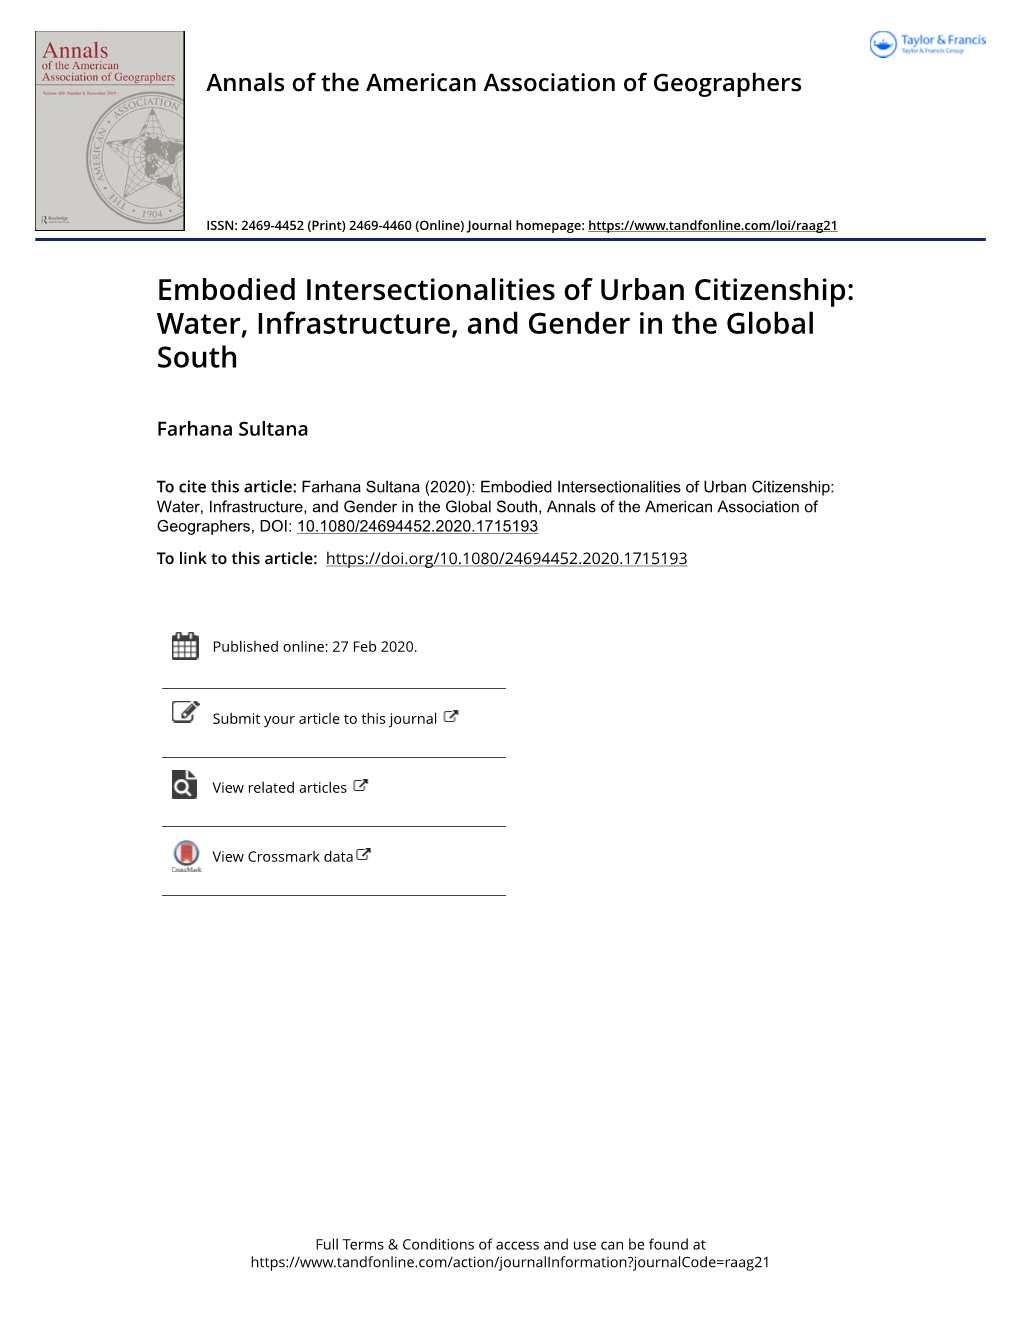 Embodied Intersectionalities of Urban Citizenship: Water, Infrastructure, and Gender in the Global South